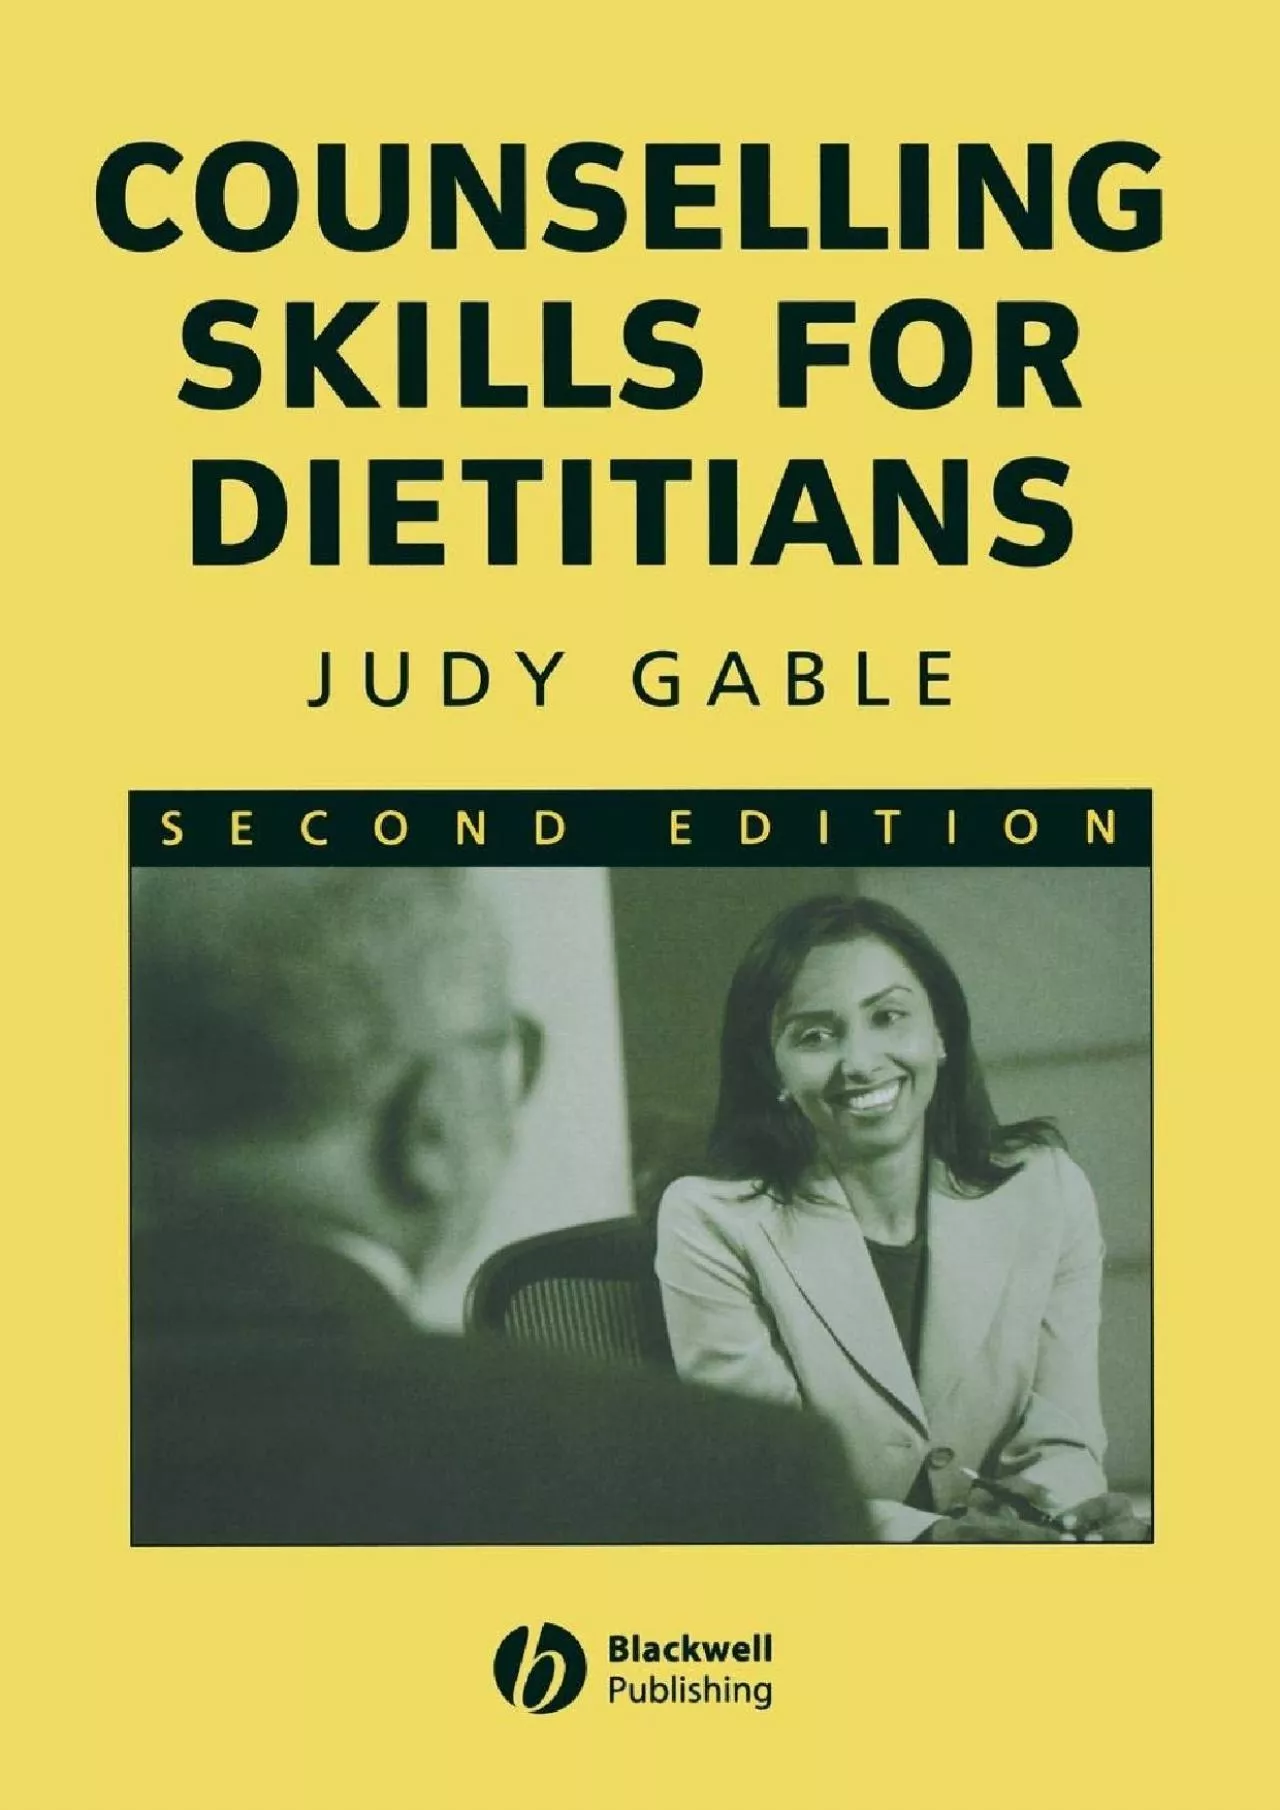 (DOWNLOAD)-Counselling Skills for Dietitians